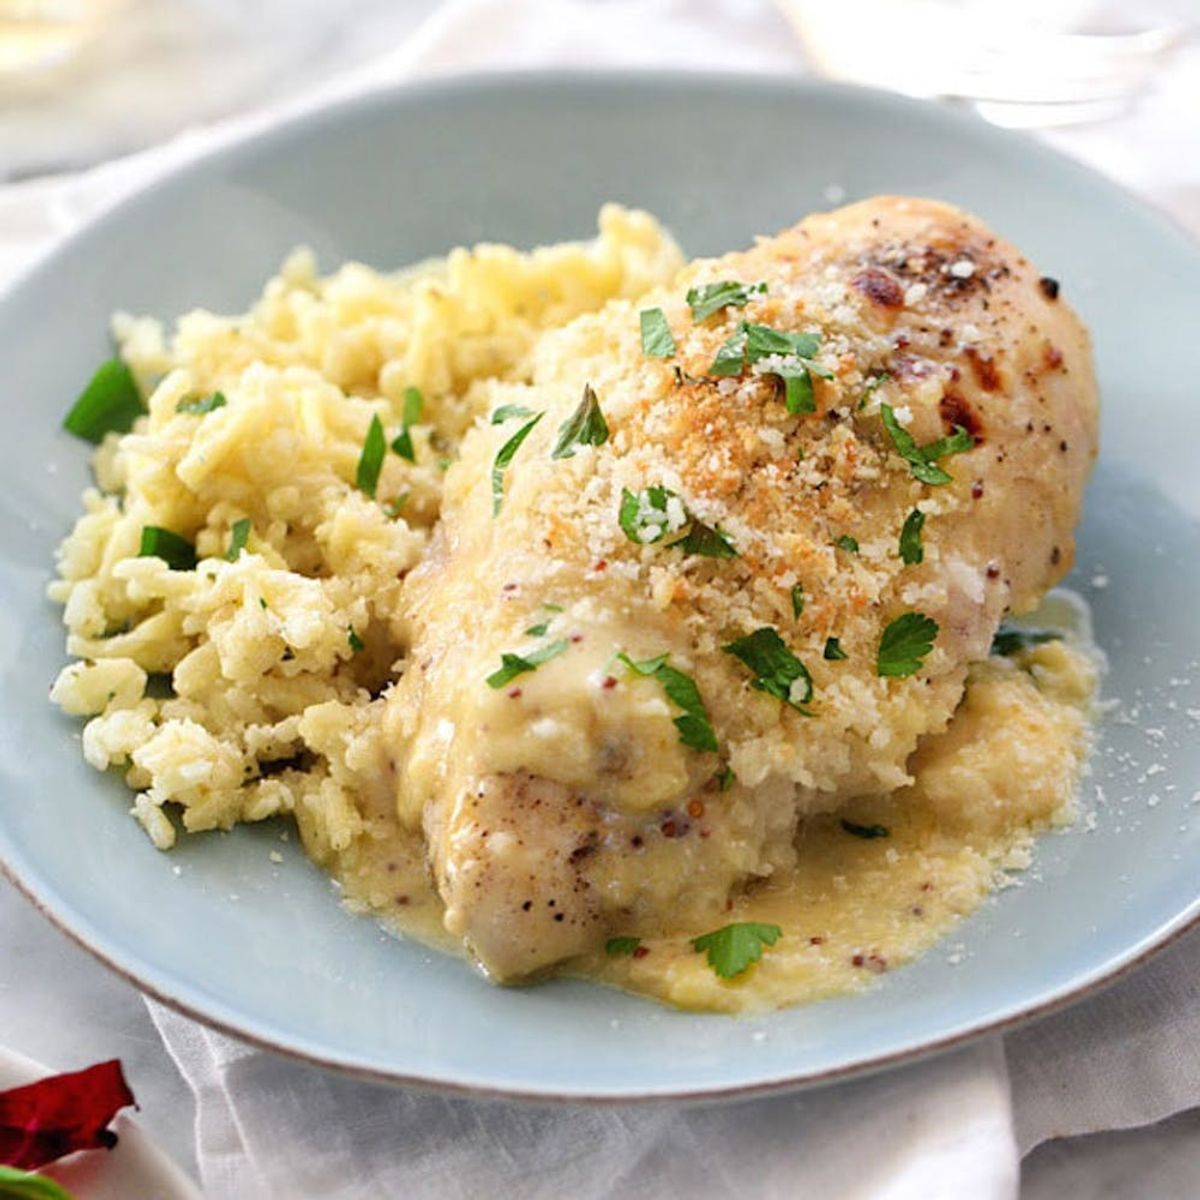 18 Recipes to Spice Up Boring Baked Chicken Breast